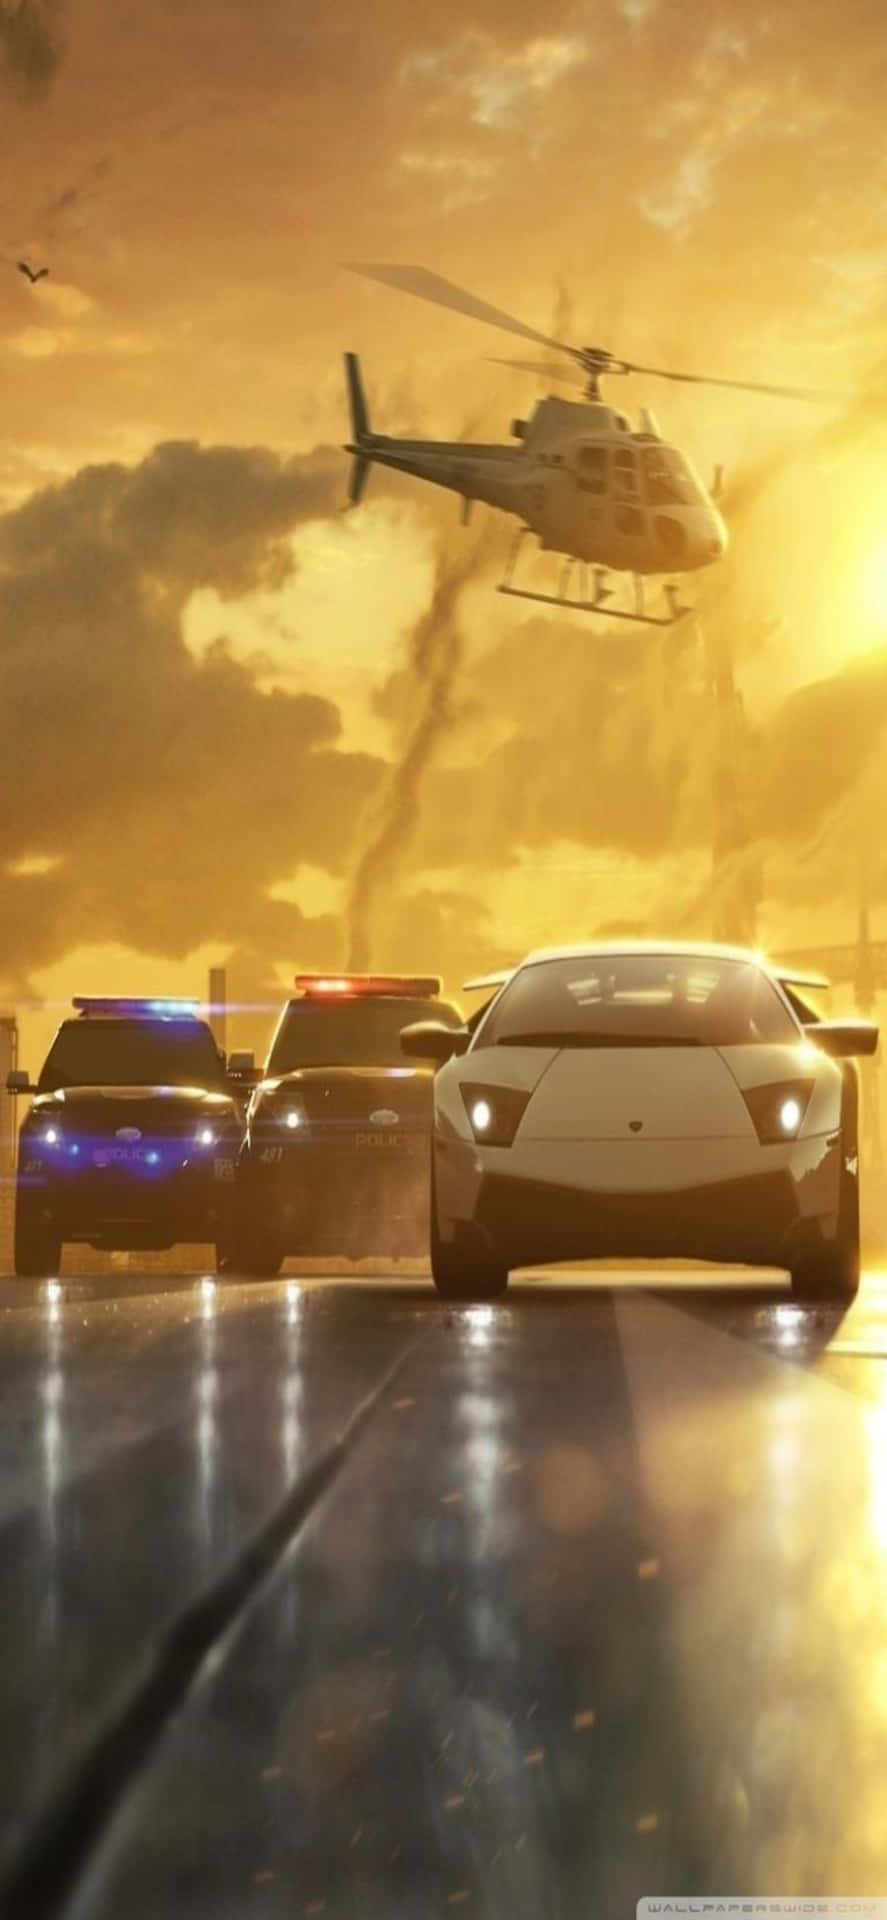 Dramatic Need for Speed Heat gaming backdrop showcased on iPhone XS Max